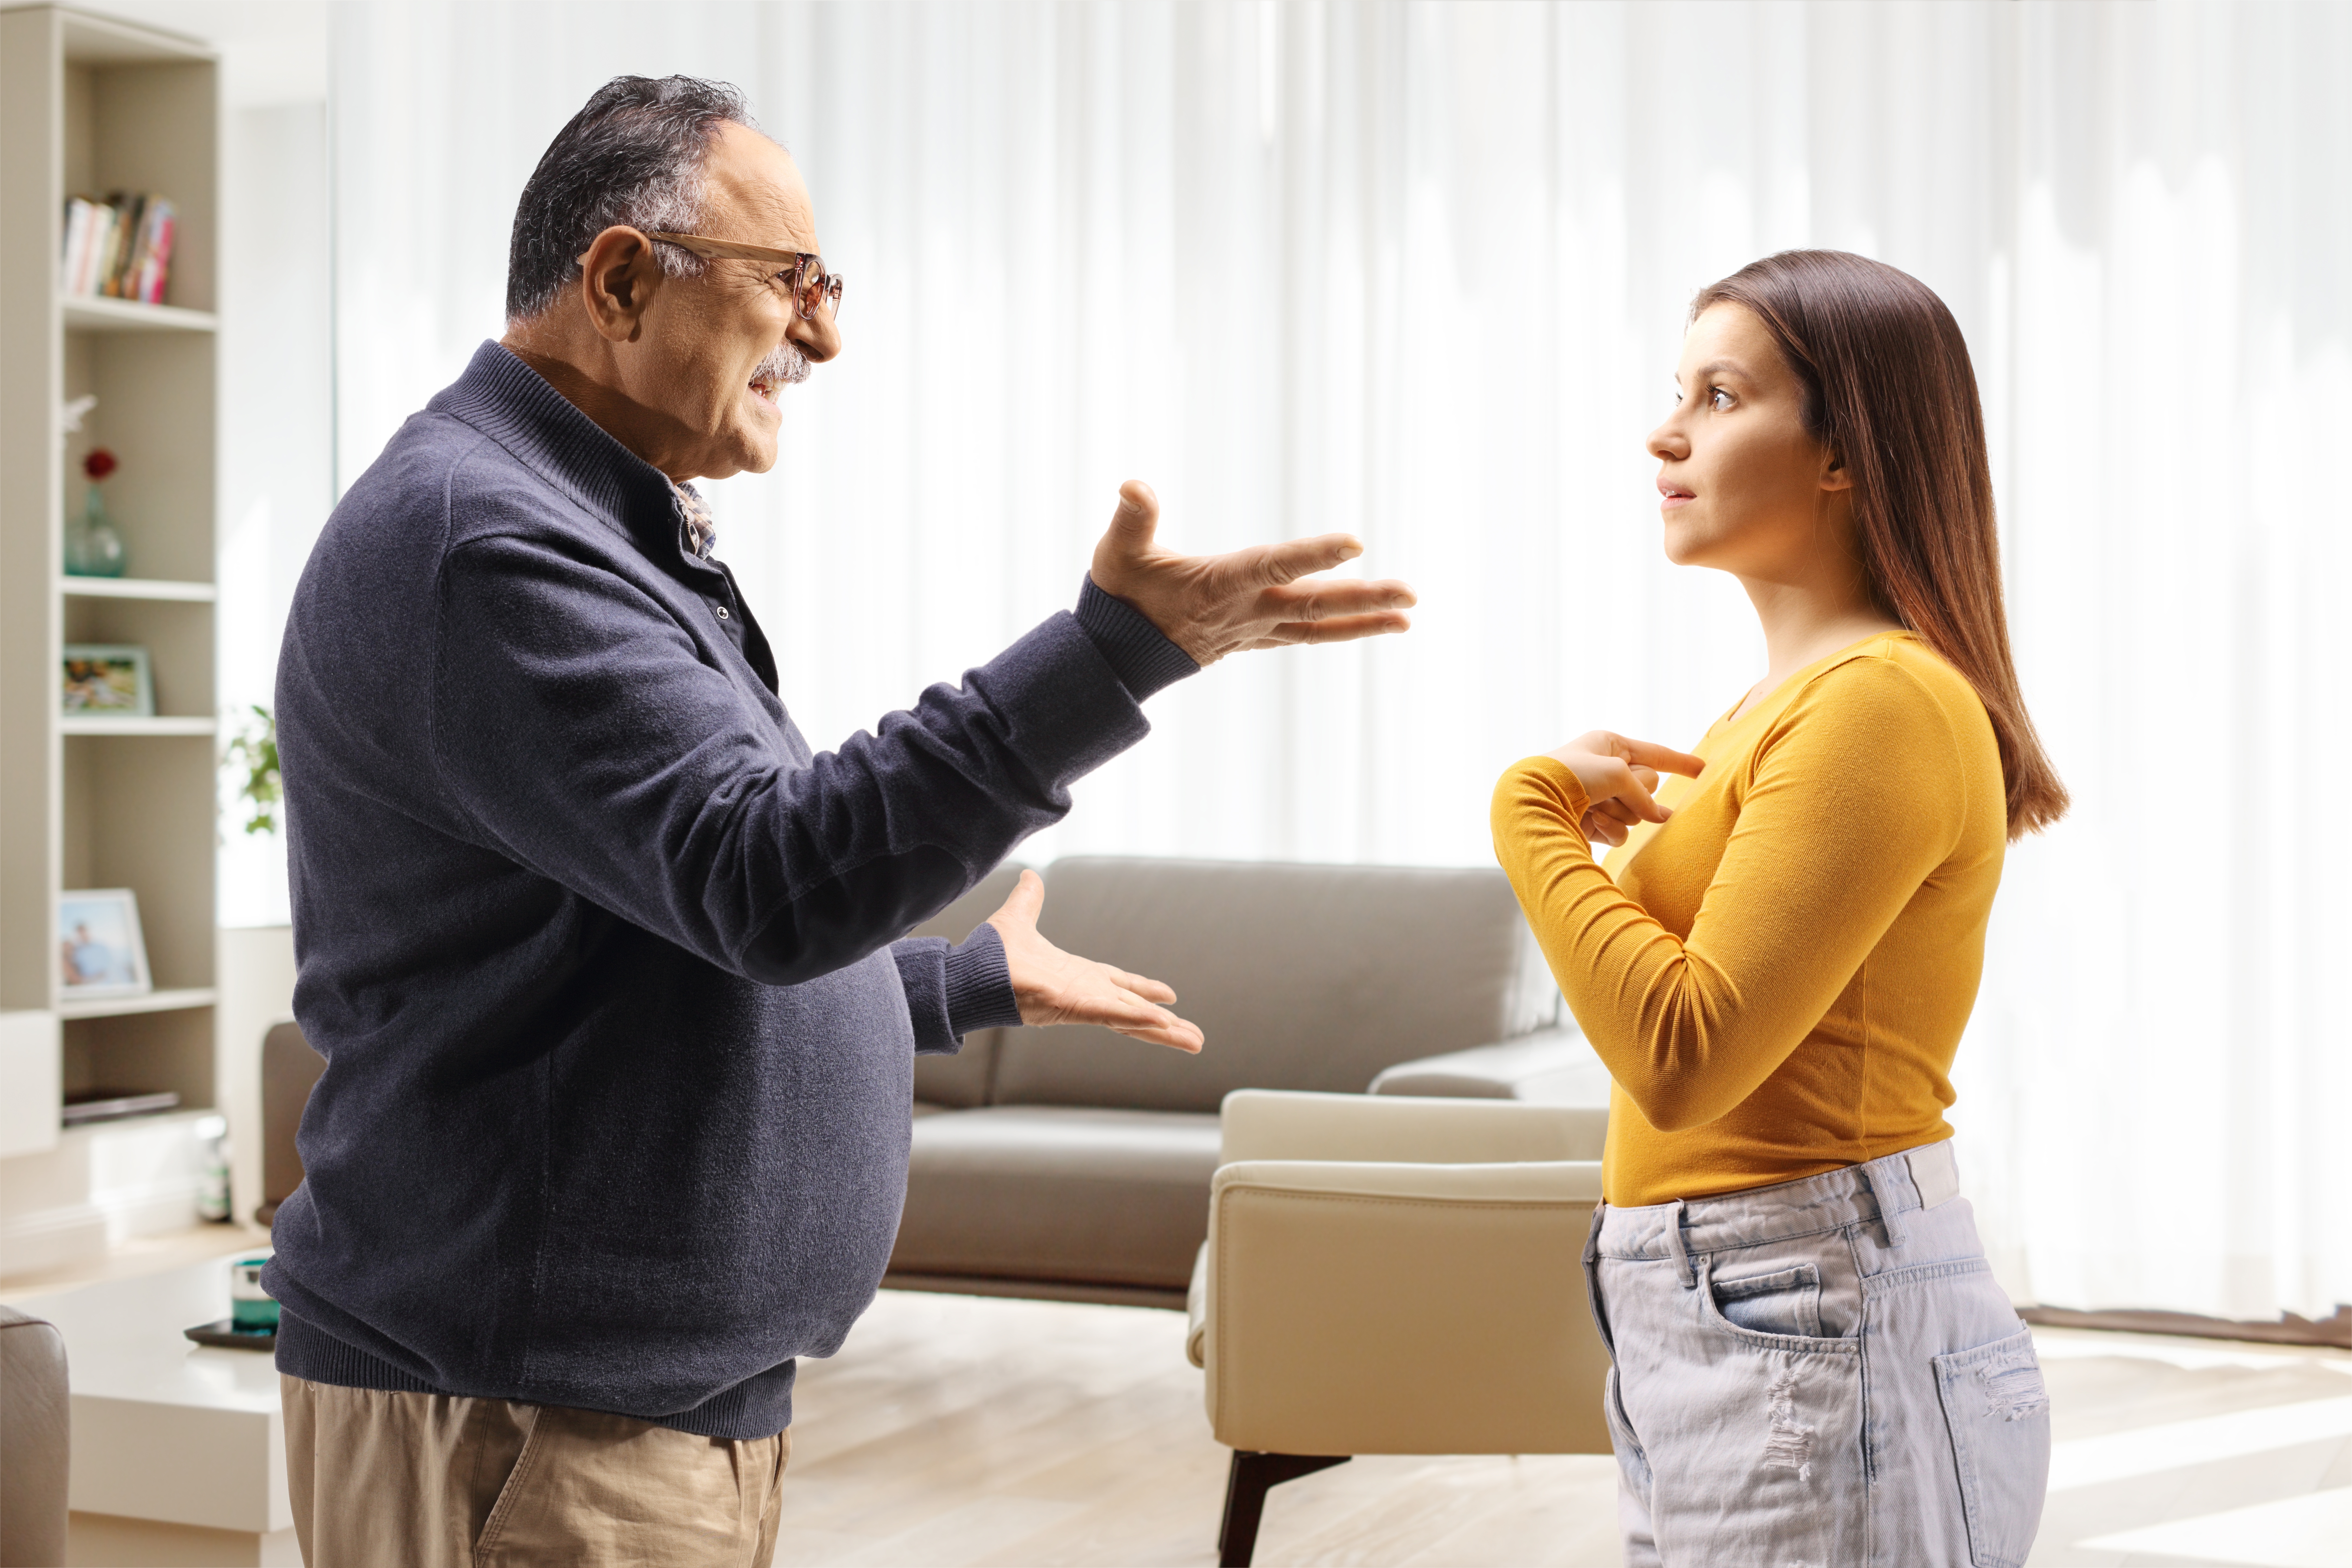 An older man having a heated discussion with his daughter | Source: Shutterstock